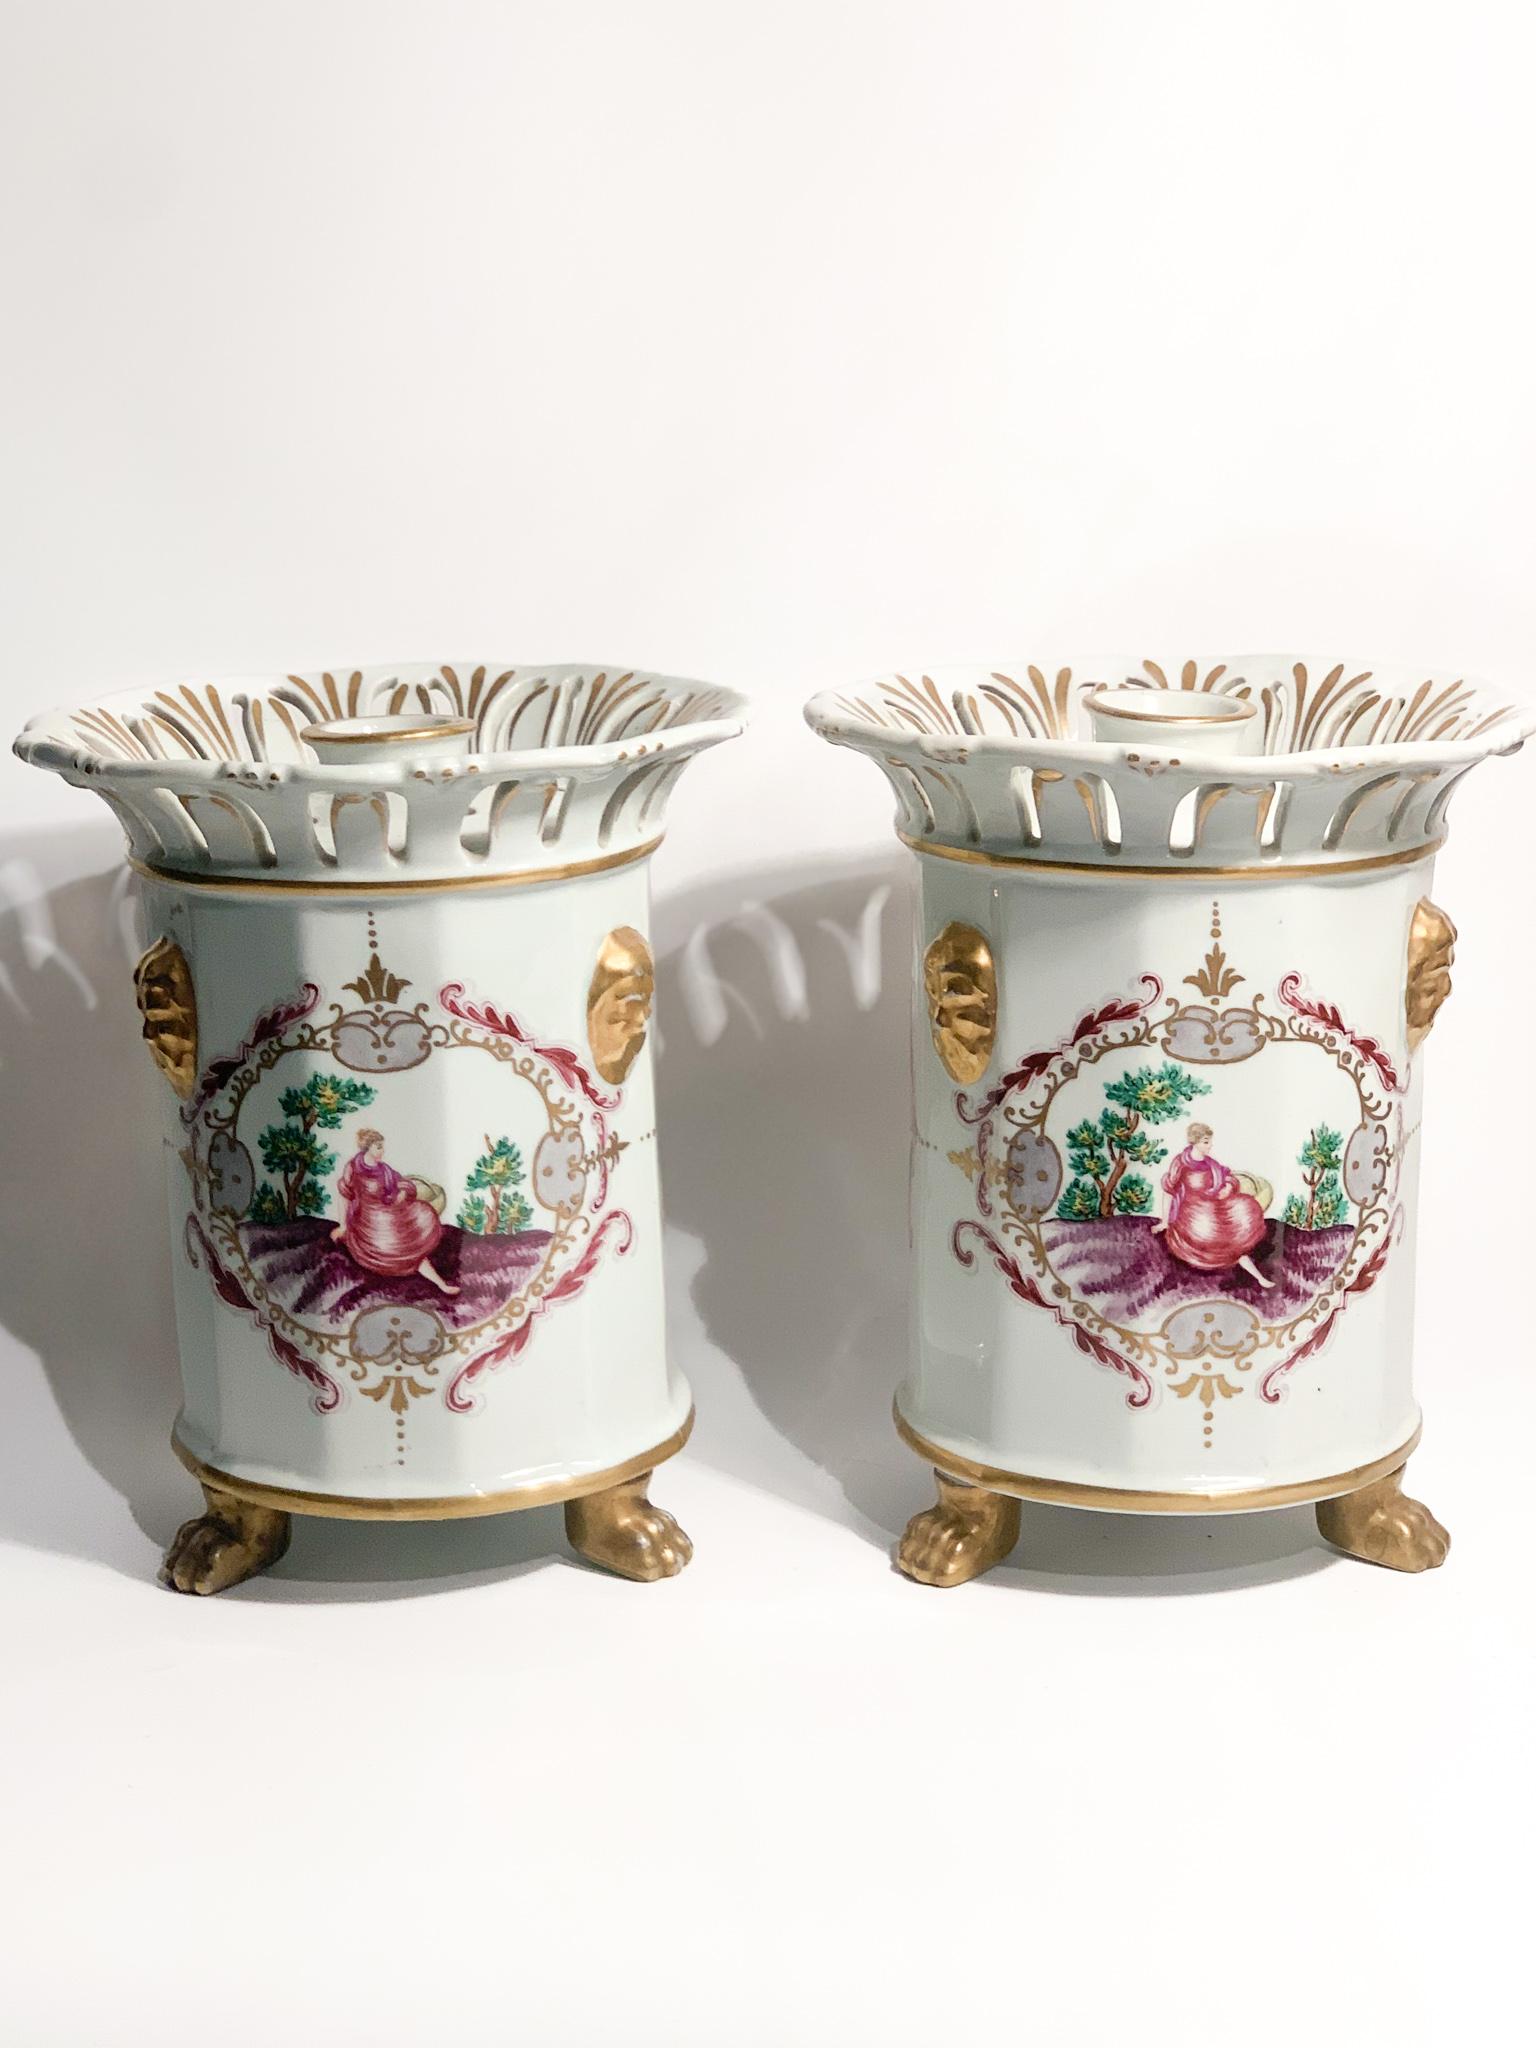 Pair of hand-painted French porcelain vases / perfume holders, made in the 1950s

Ø 18 cm h 22 cm

A support foot has been restored. Further information on request.